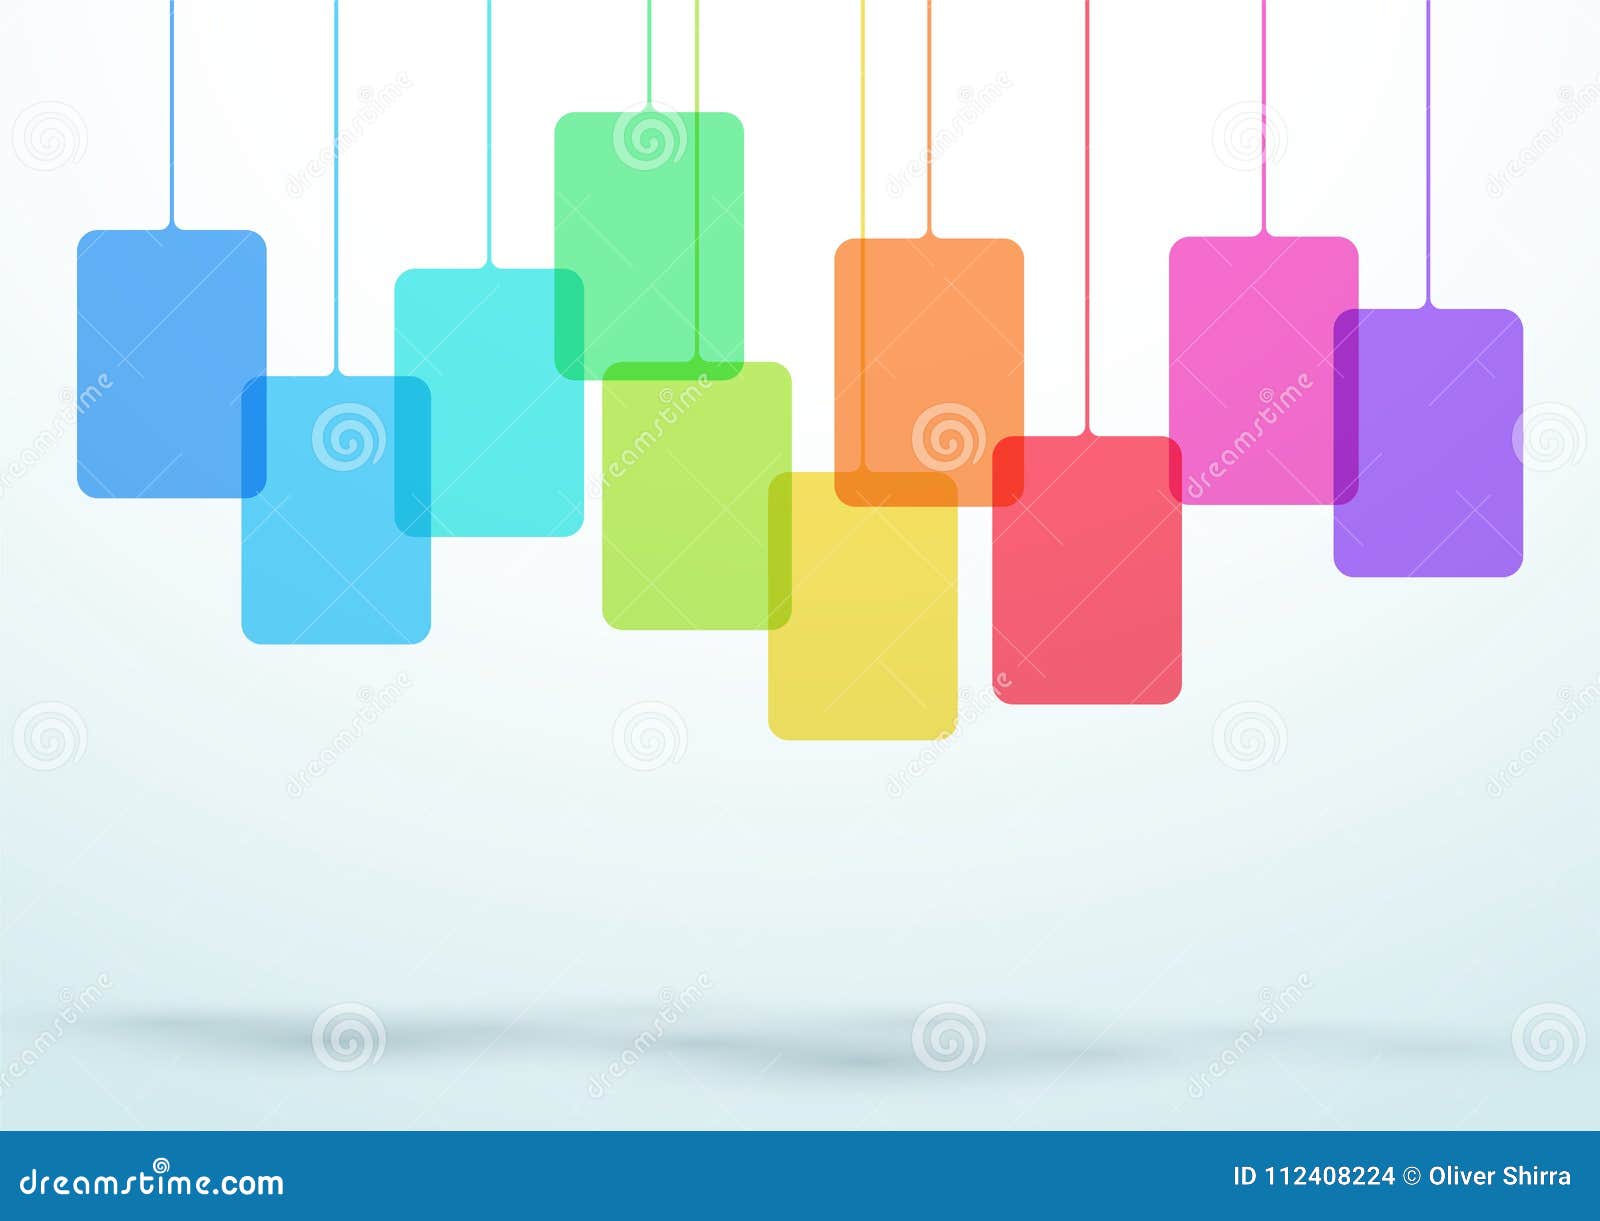 Abstract Vector Flat Colorful Box Signs Layout Design Stock Vector -  Illustration of business, page: 112408224